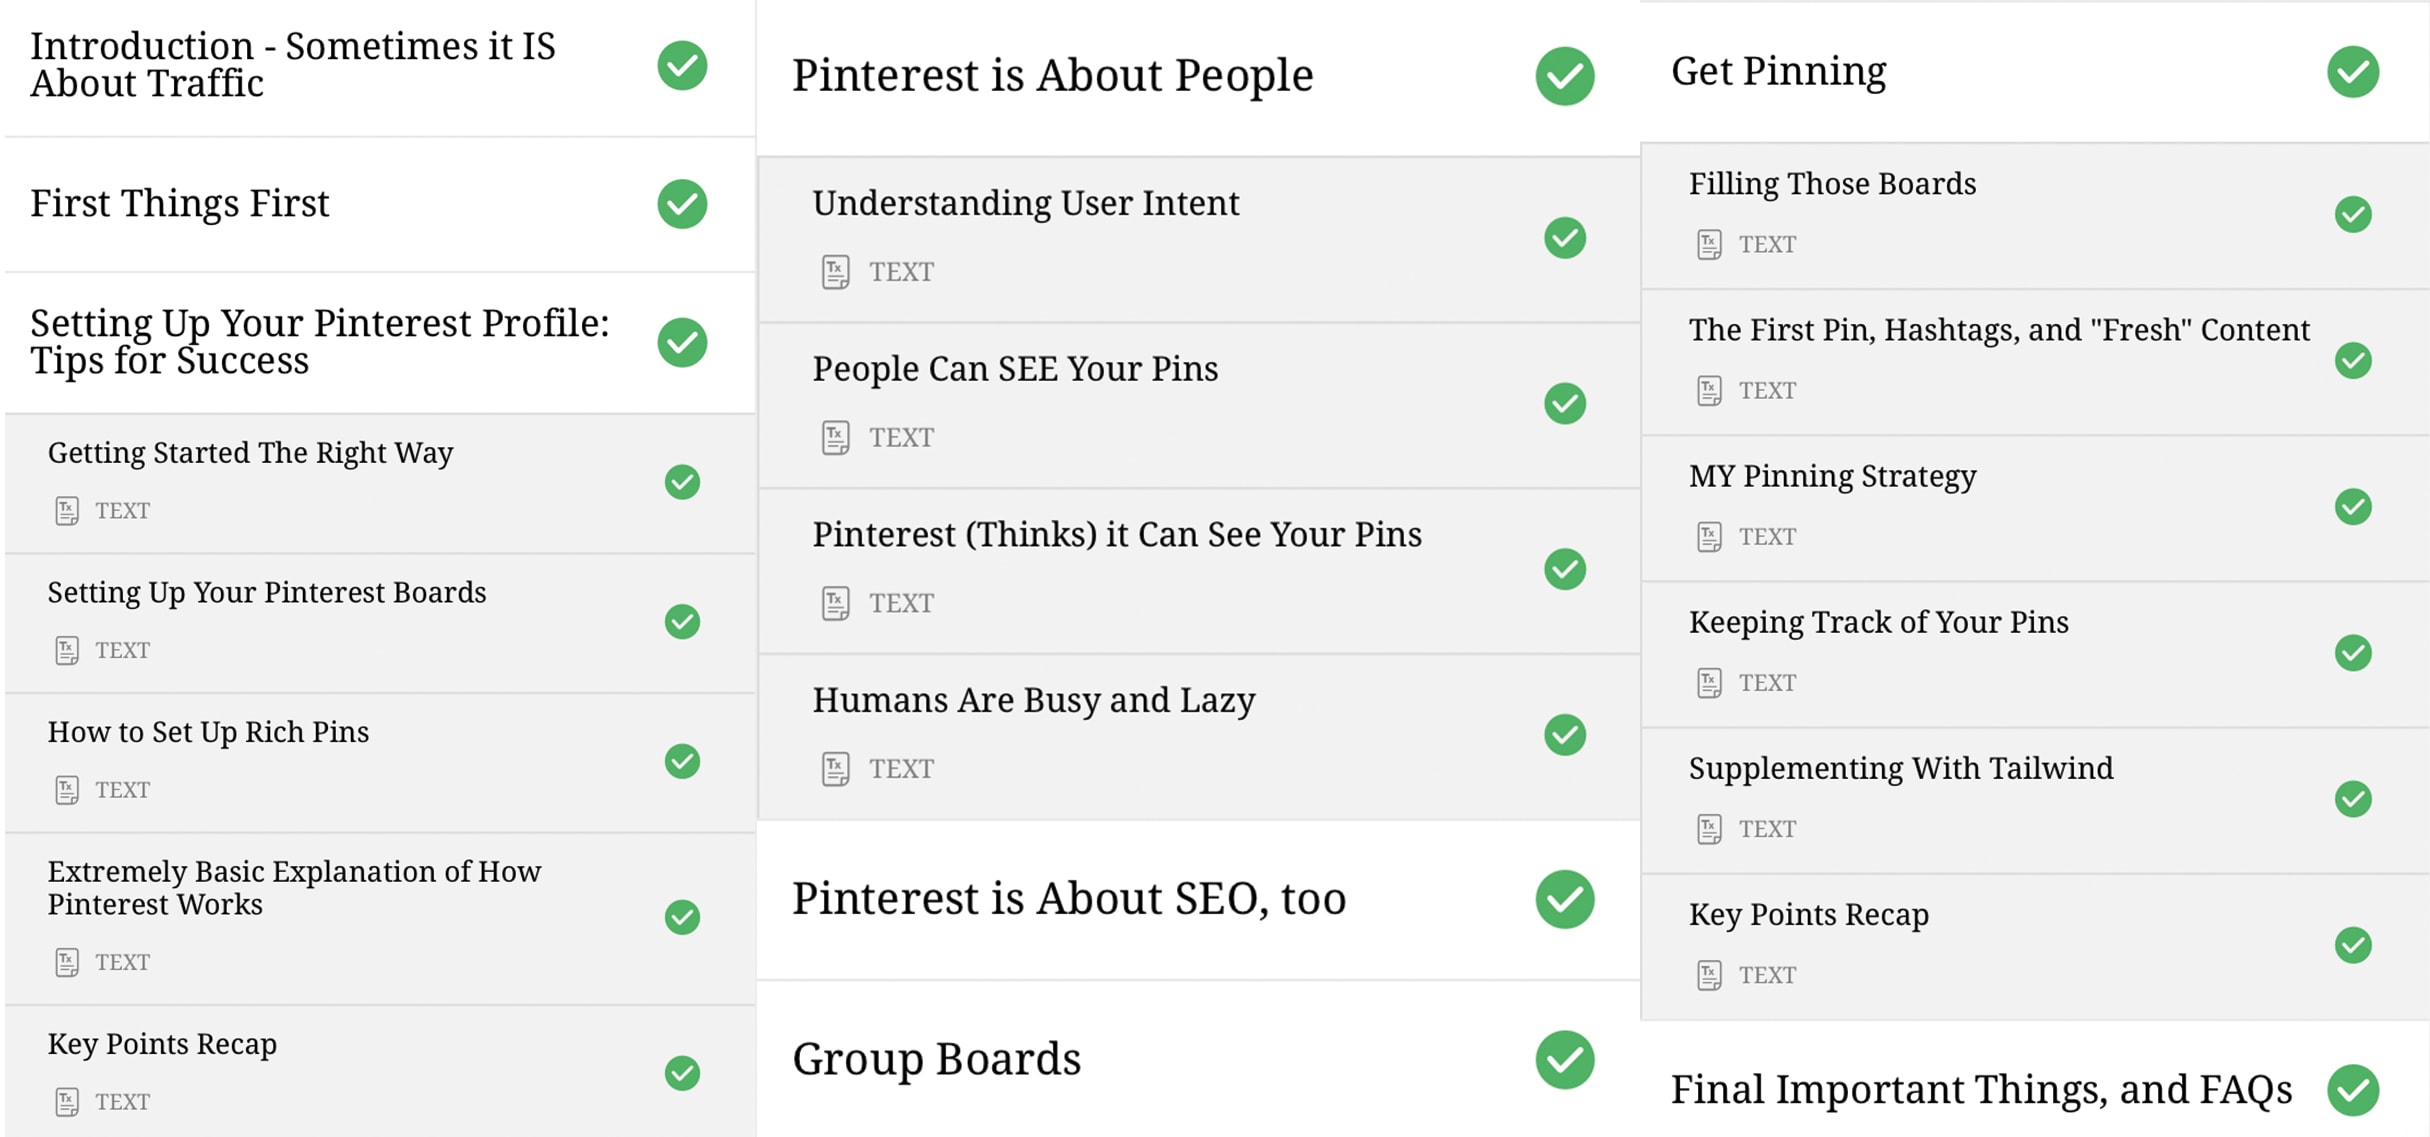 Pinteresting Strategies Review - The best value Pinterest course out there. Here are my results.